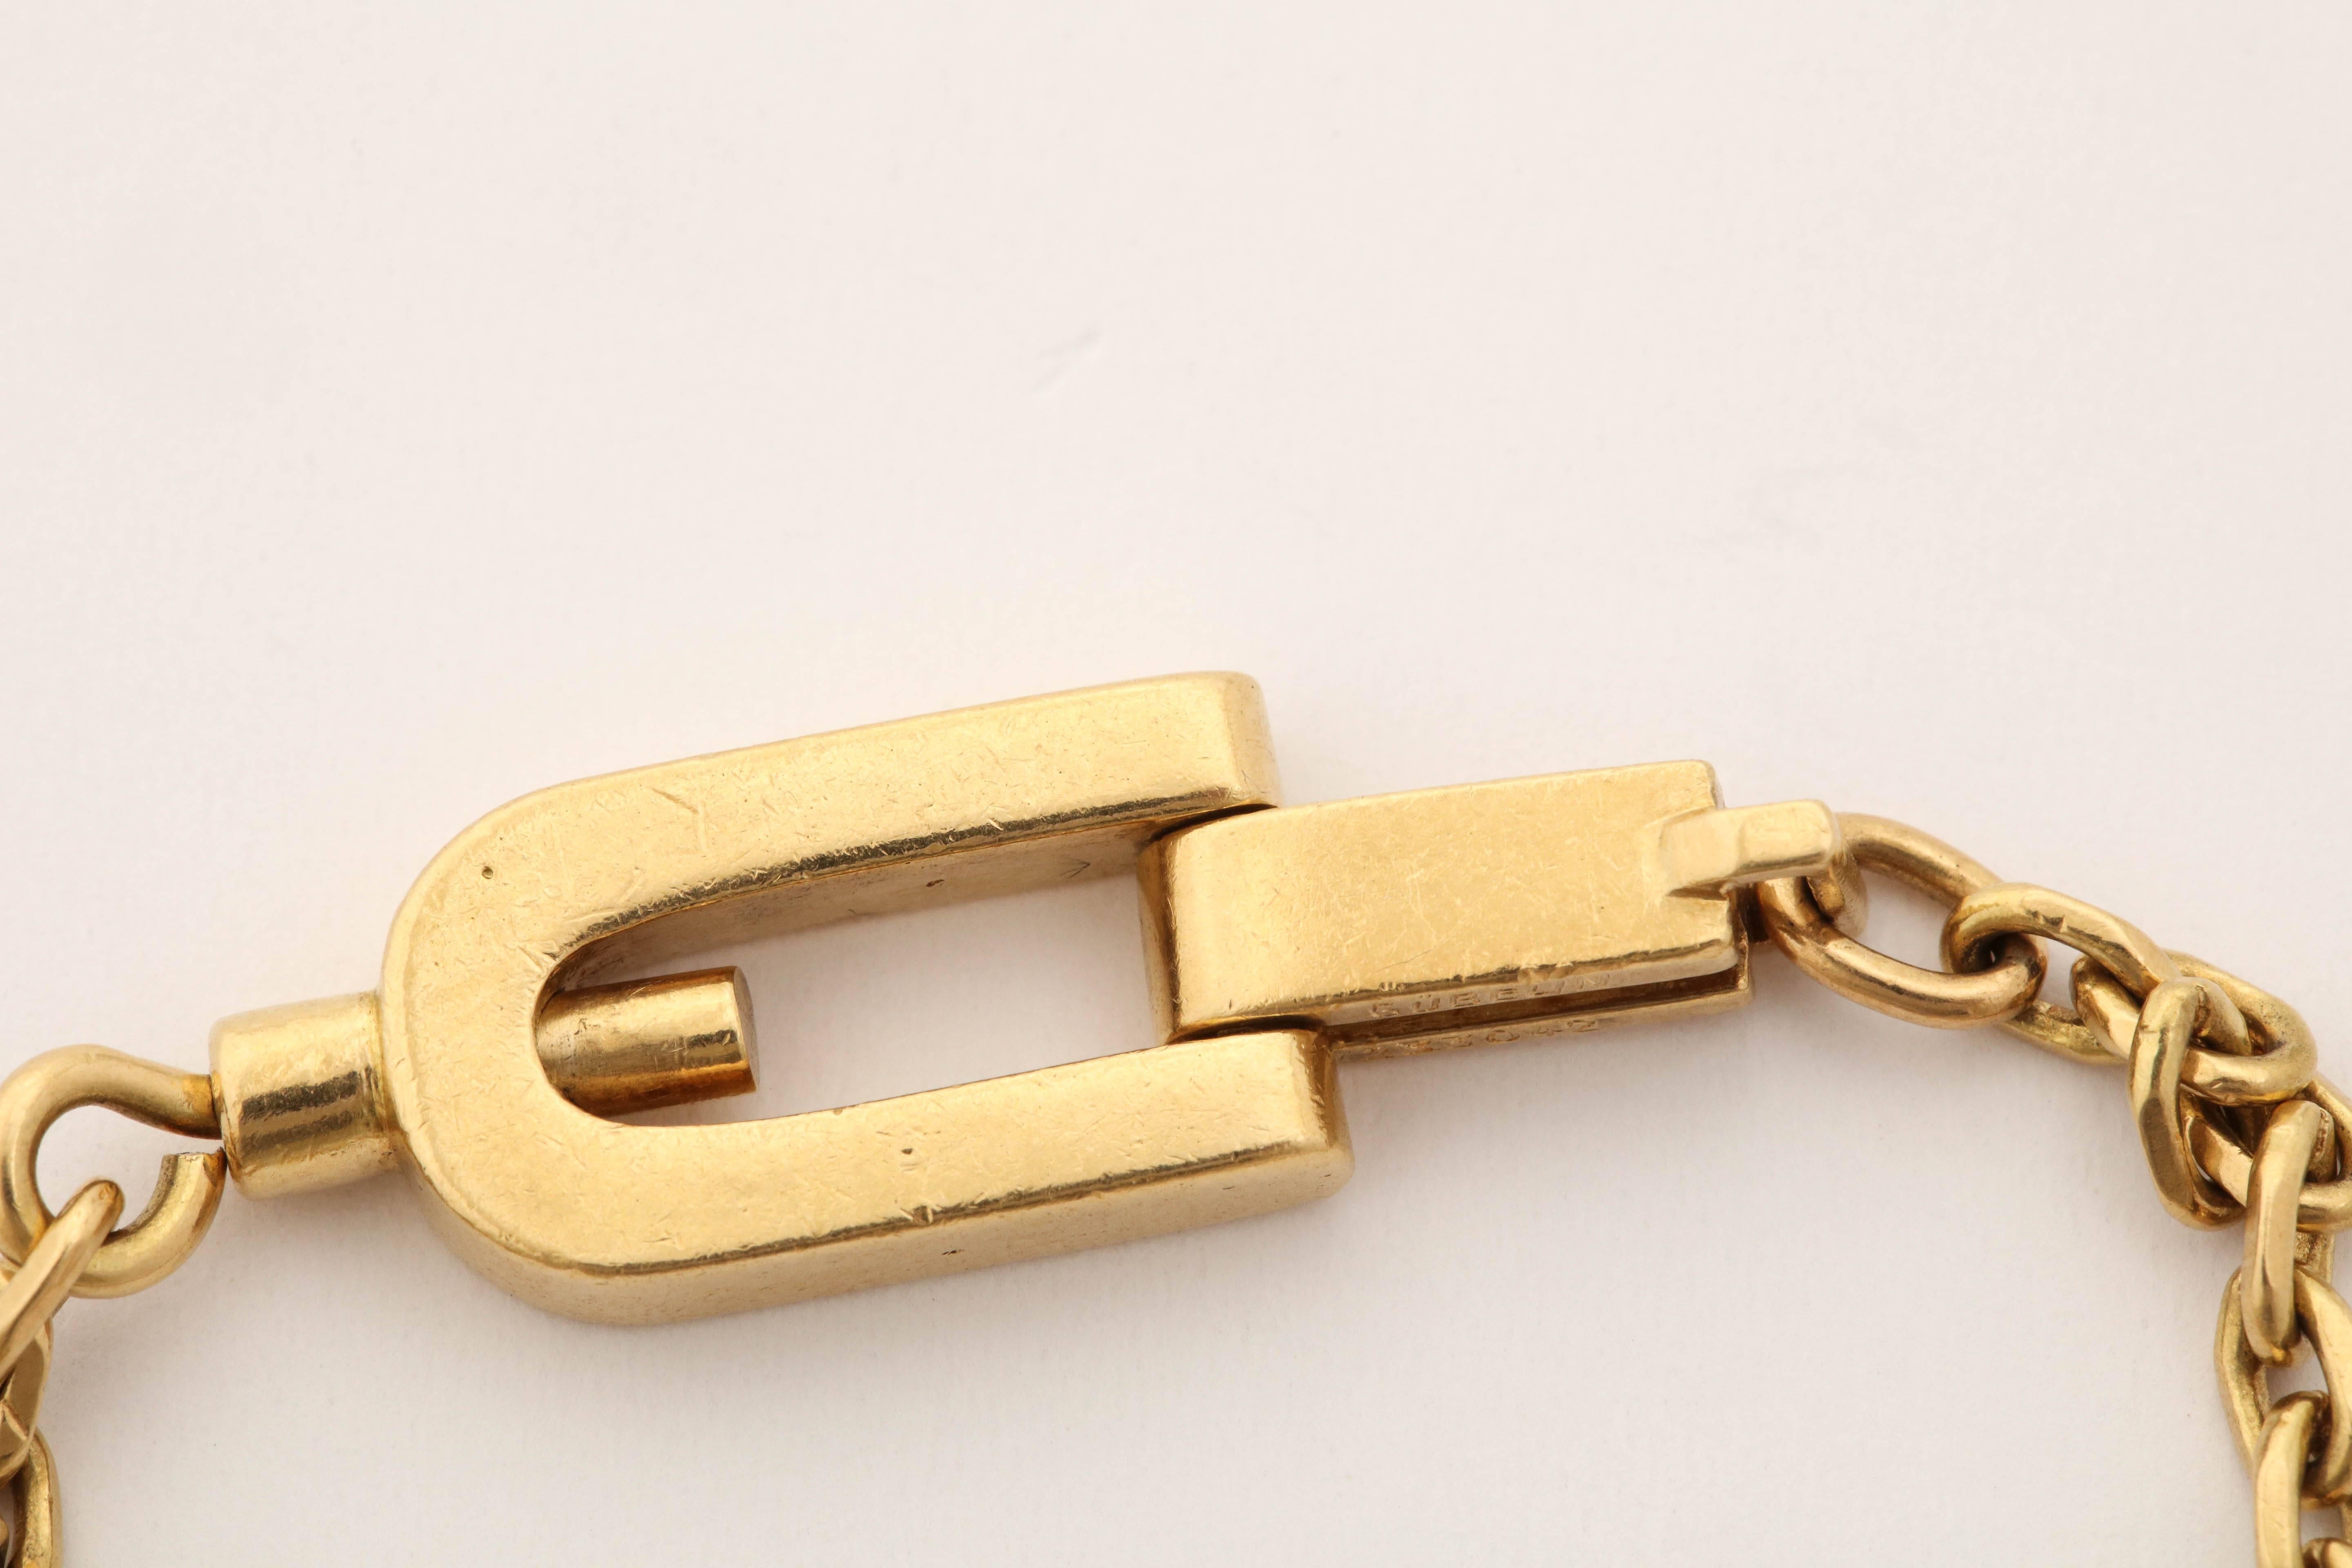 One 18kt Gold Open Link Unisex Key Chain With A Beautiful And Unique 18kt Gold Clasp And Lock. This Is A True One Of A Kind Key Chain,Made In France And Created By Gubelin Jewelers In The 1950's.Signed And Stamped With Serial #233042.